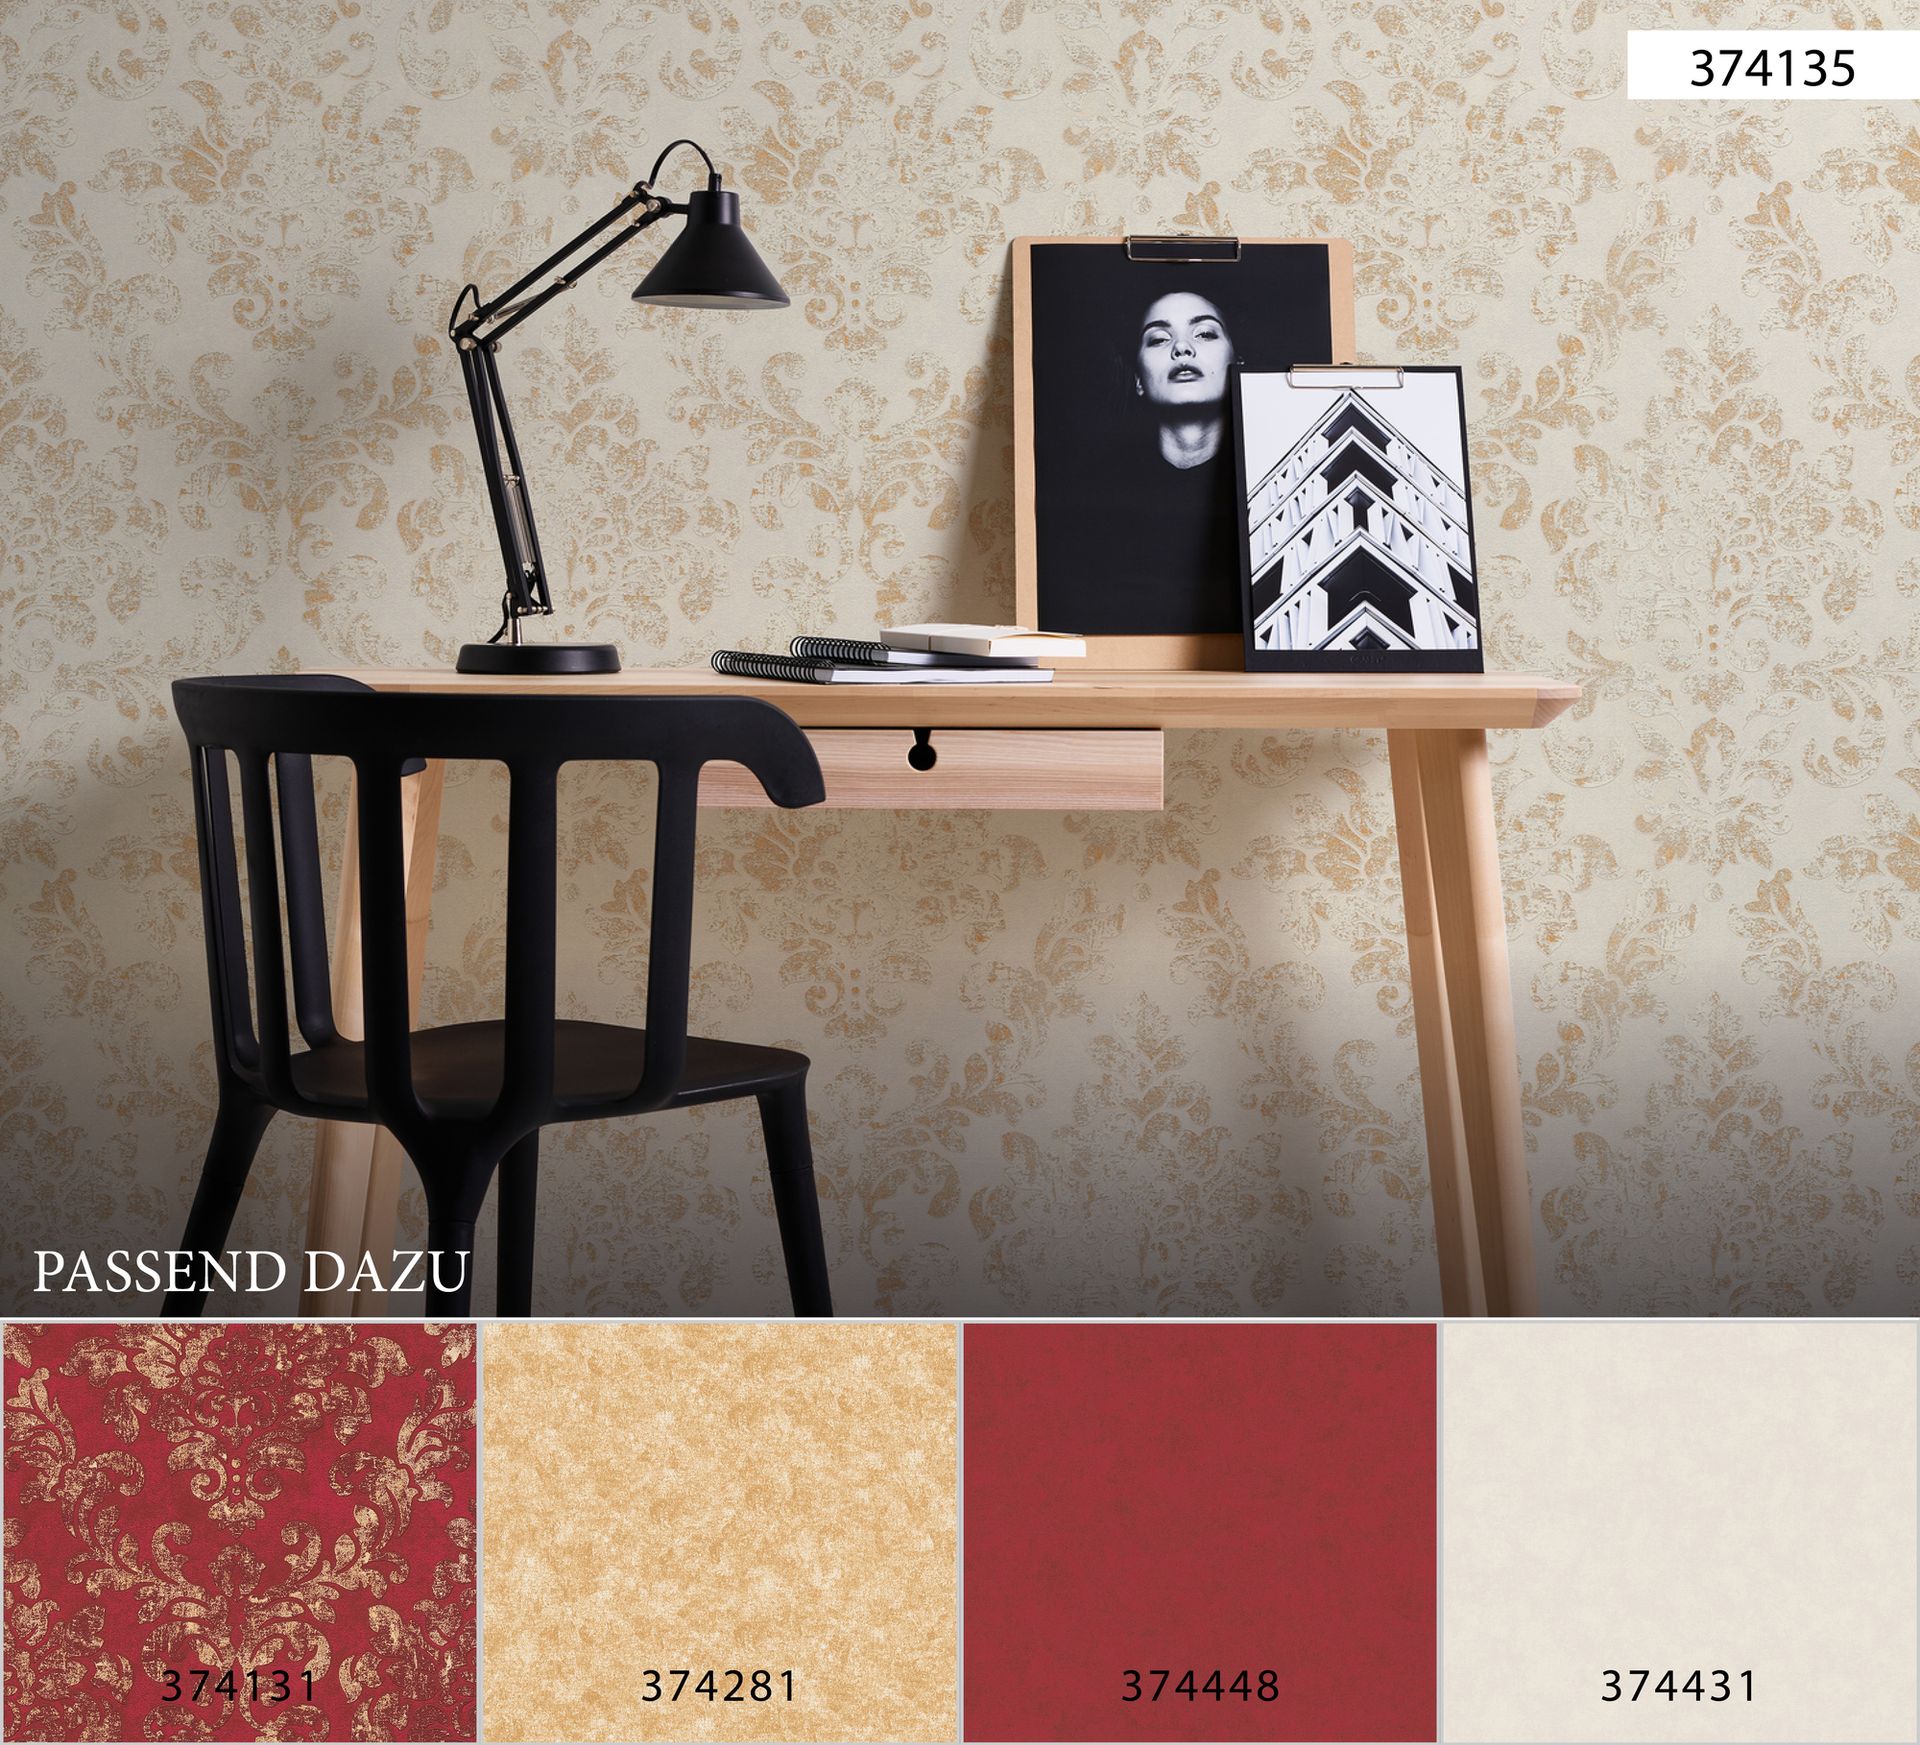 A.S. Création Neue Bude 2.0 Edition 2, Barock Tapete, beige, gold 374135